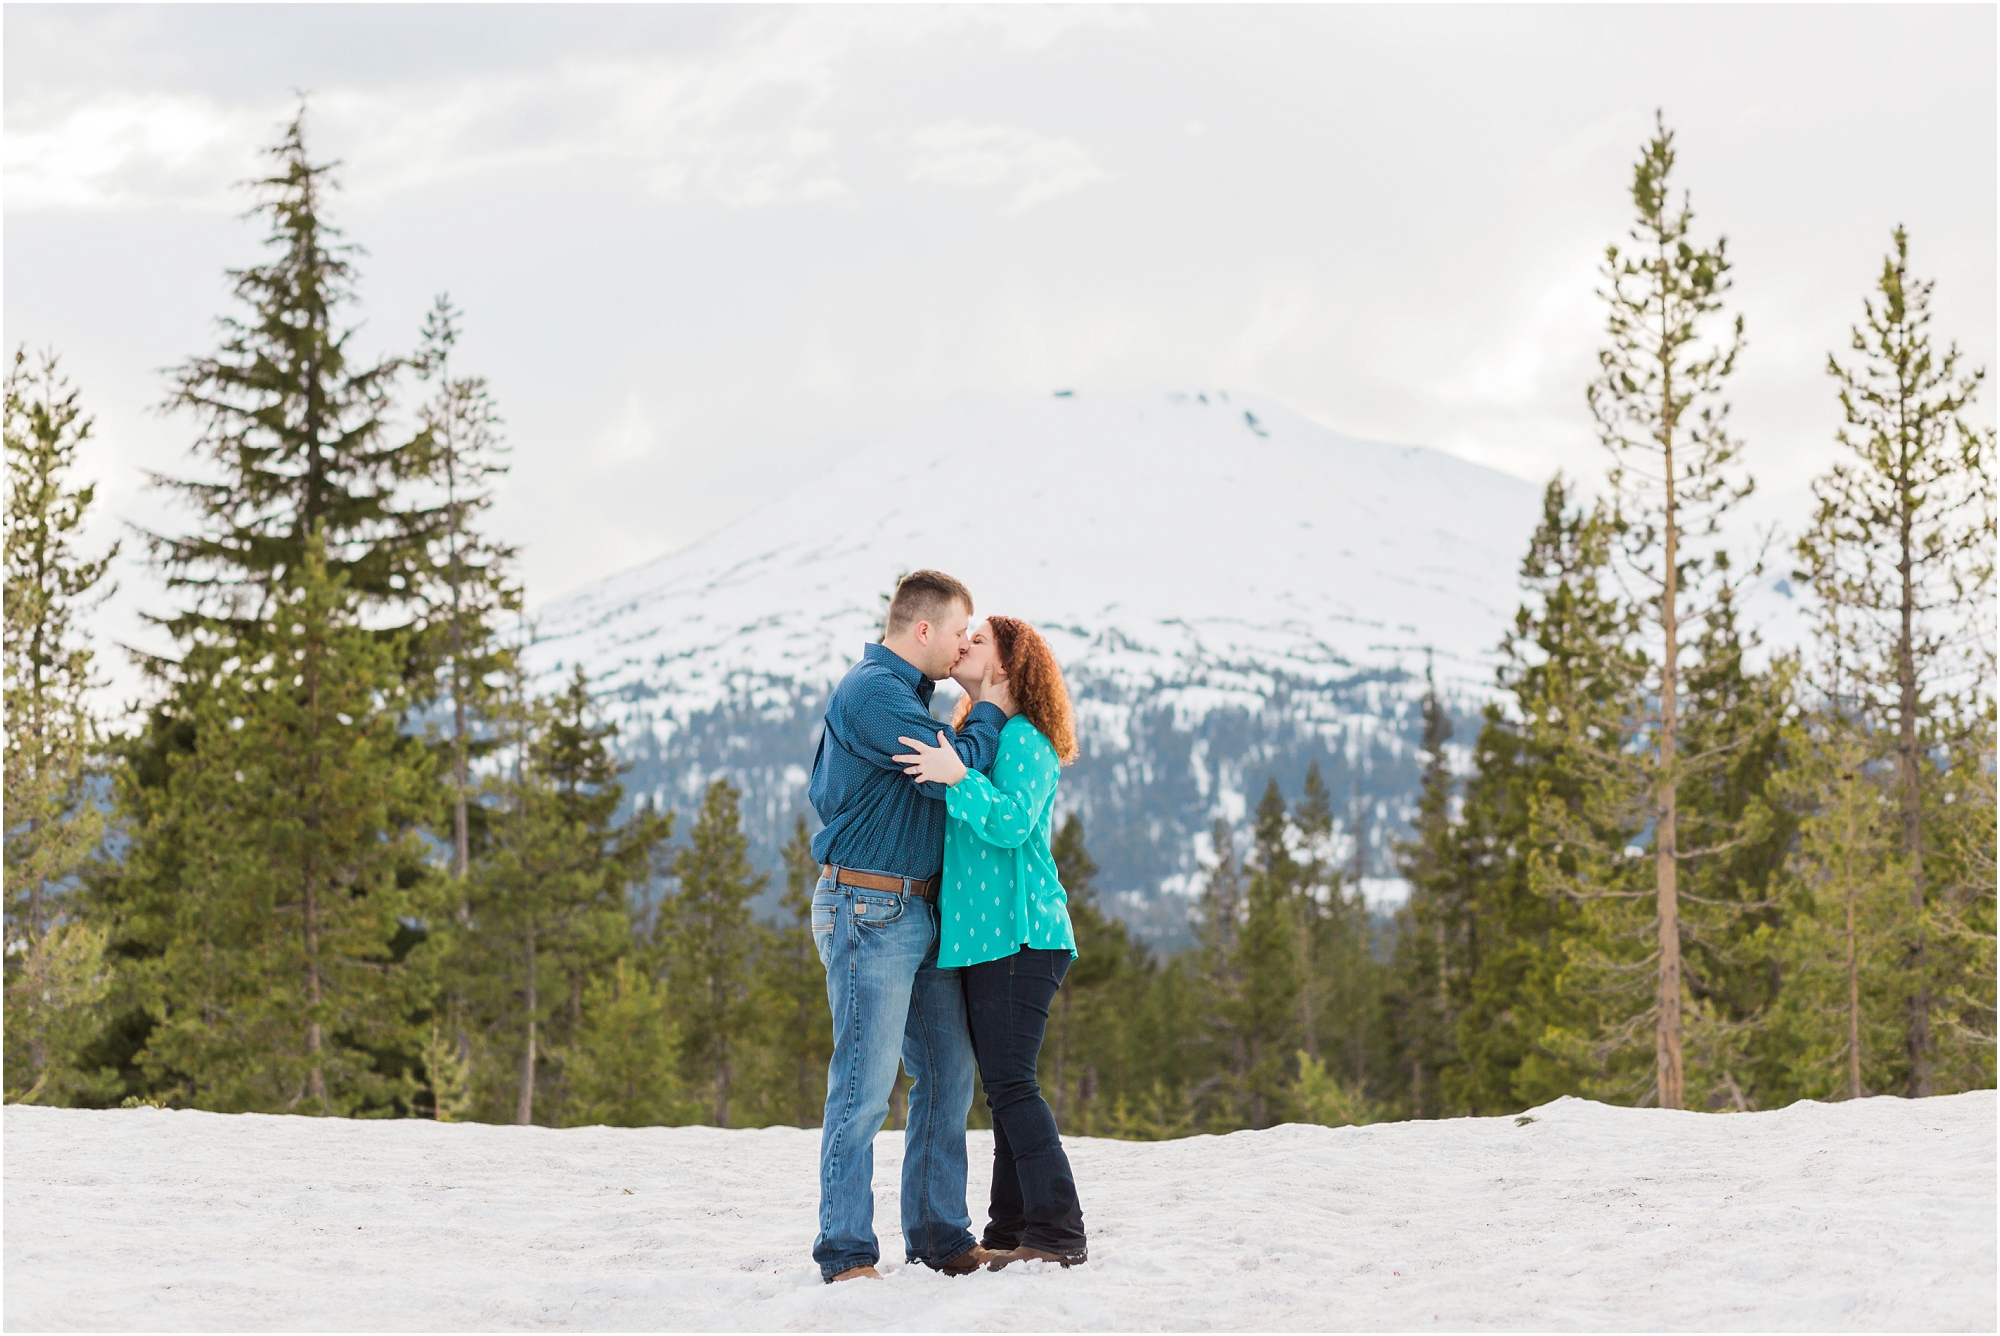 A killer view of Mt. Bachelor along the Cascade Lakes highway in this classic Bend Oregon engagement session. 